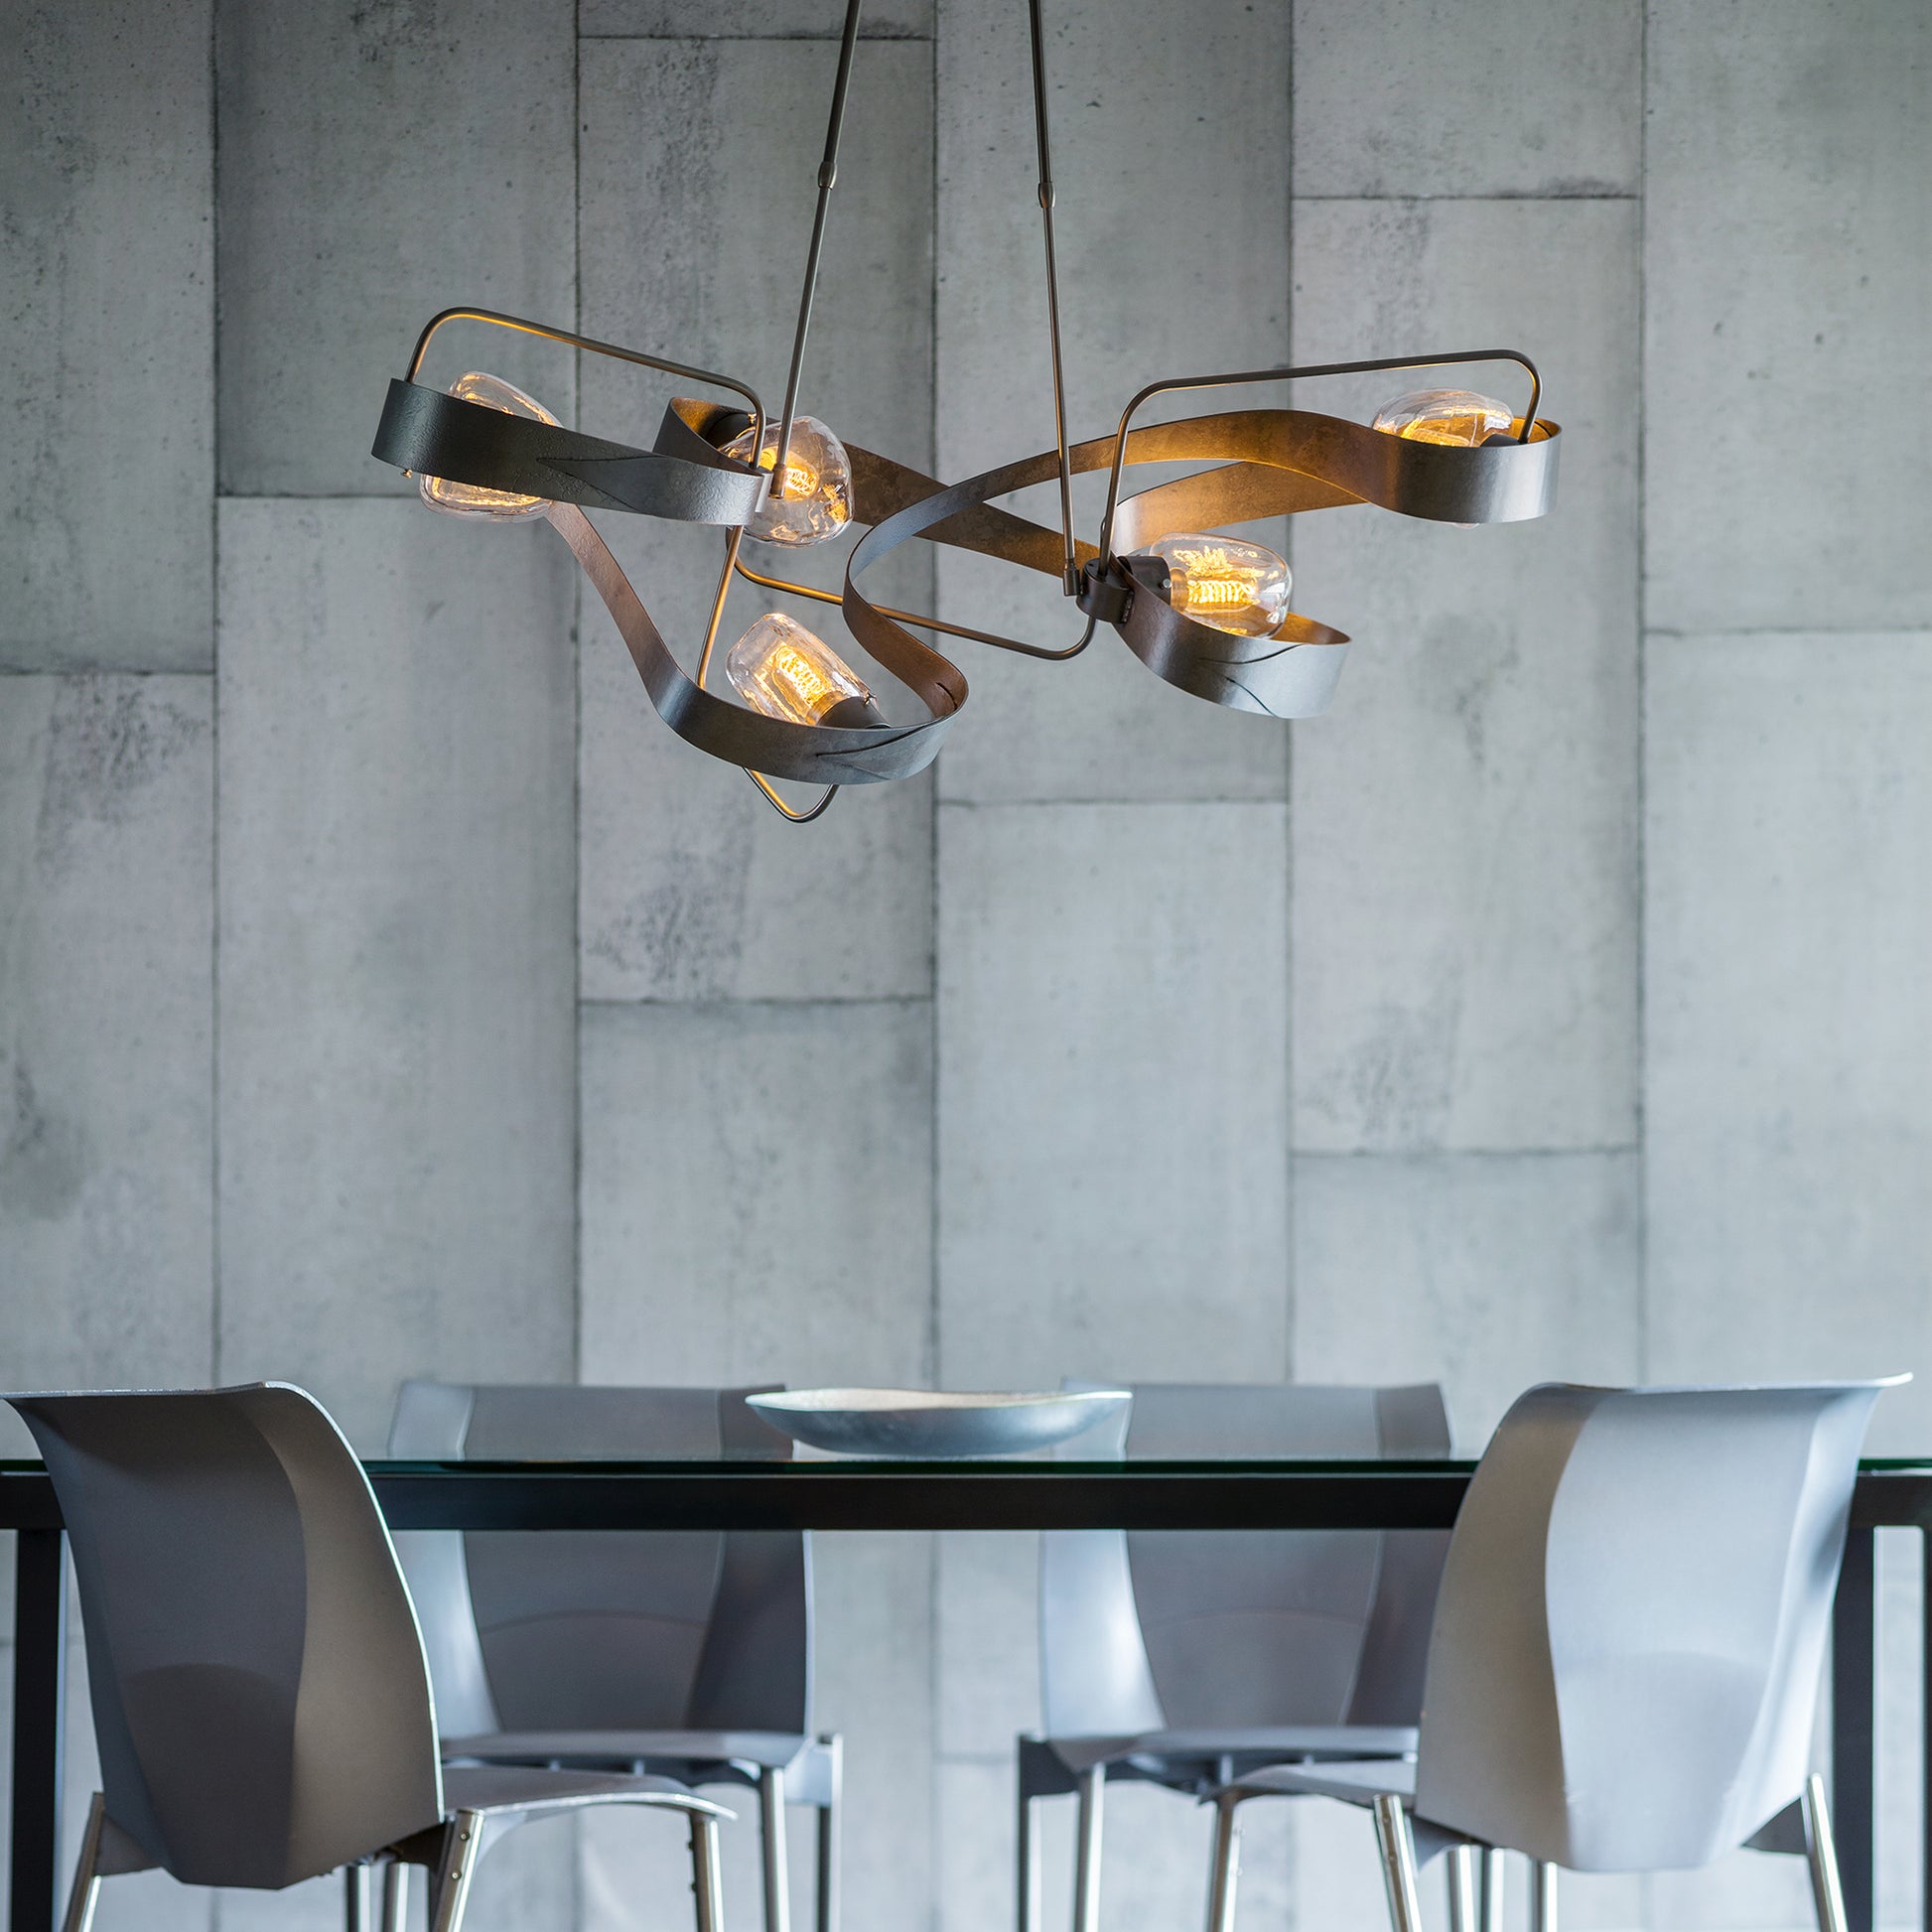 A modern dining room with Hubbardton Forge Graffiti Pendant lighting and grey chairs.